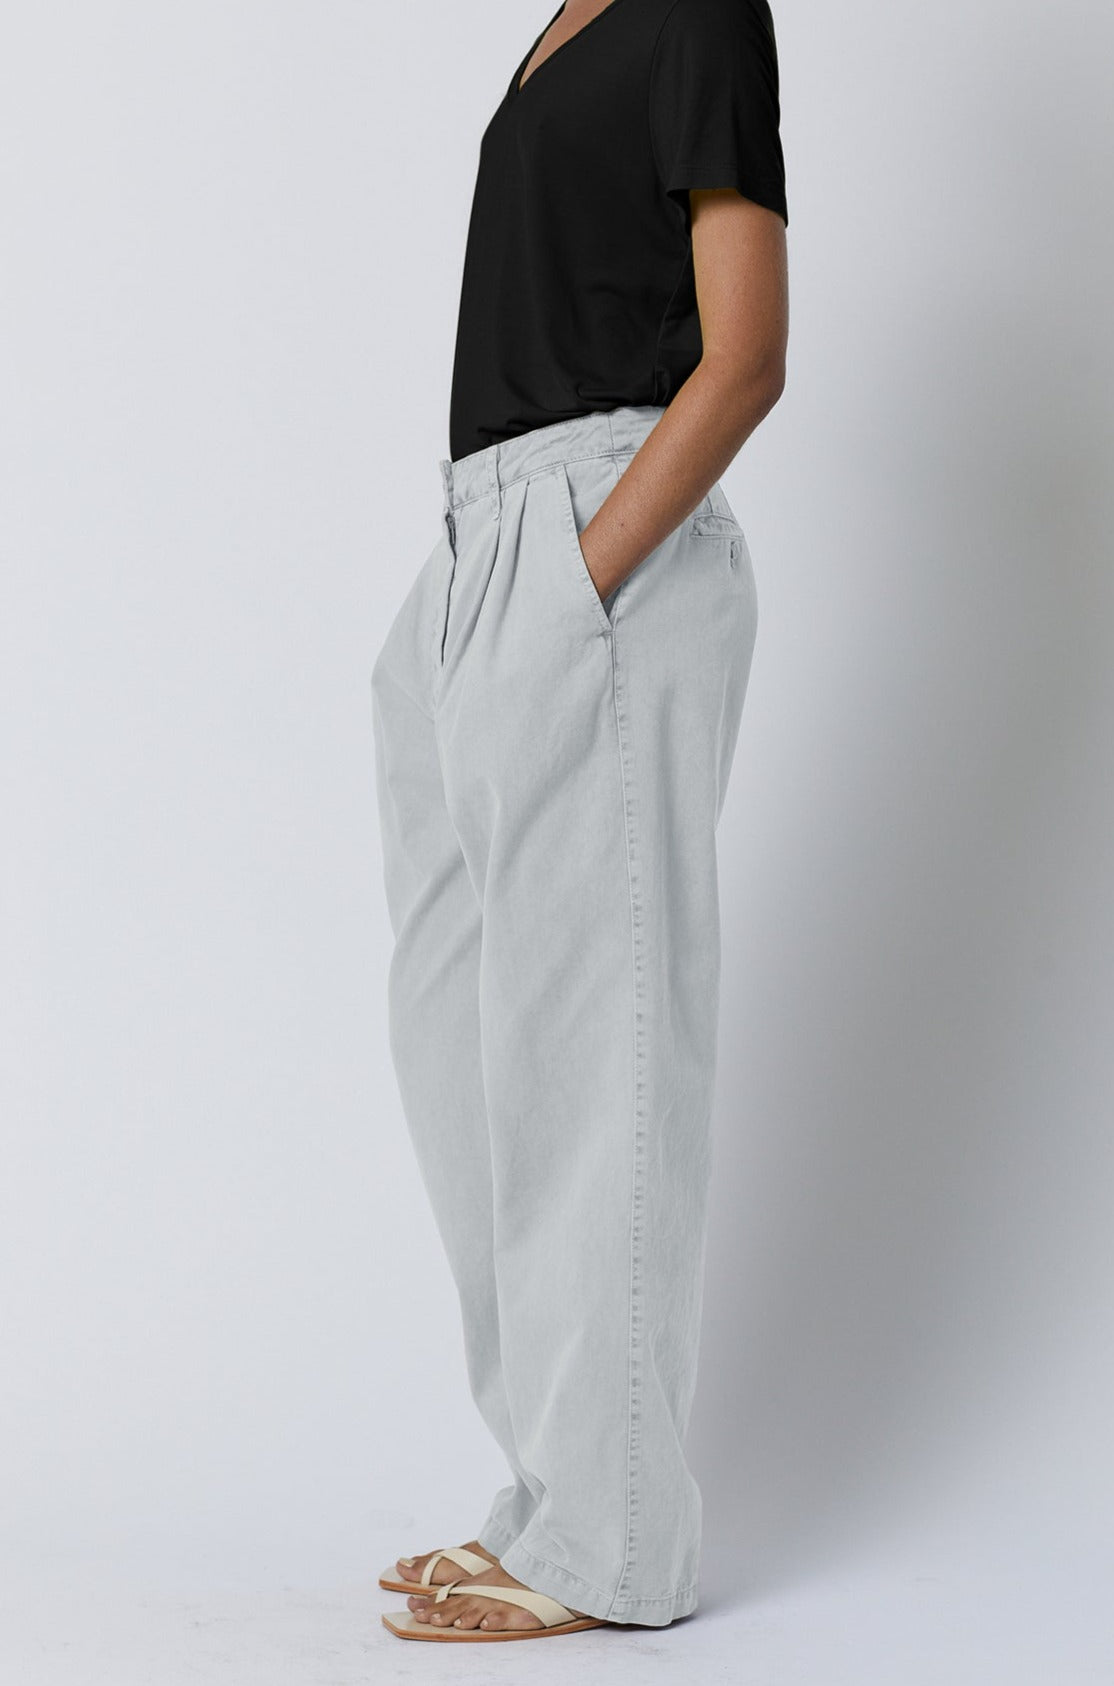   Temescal Pant in candle side 